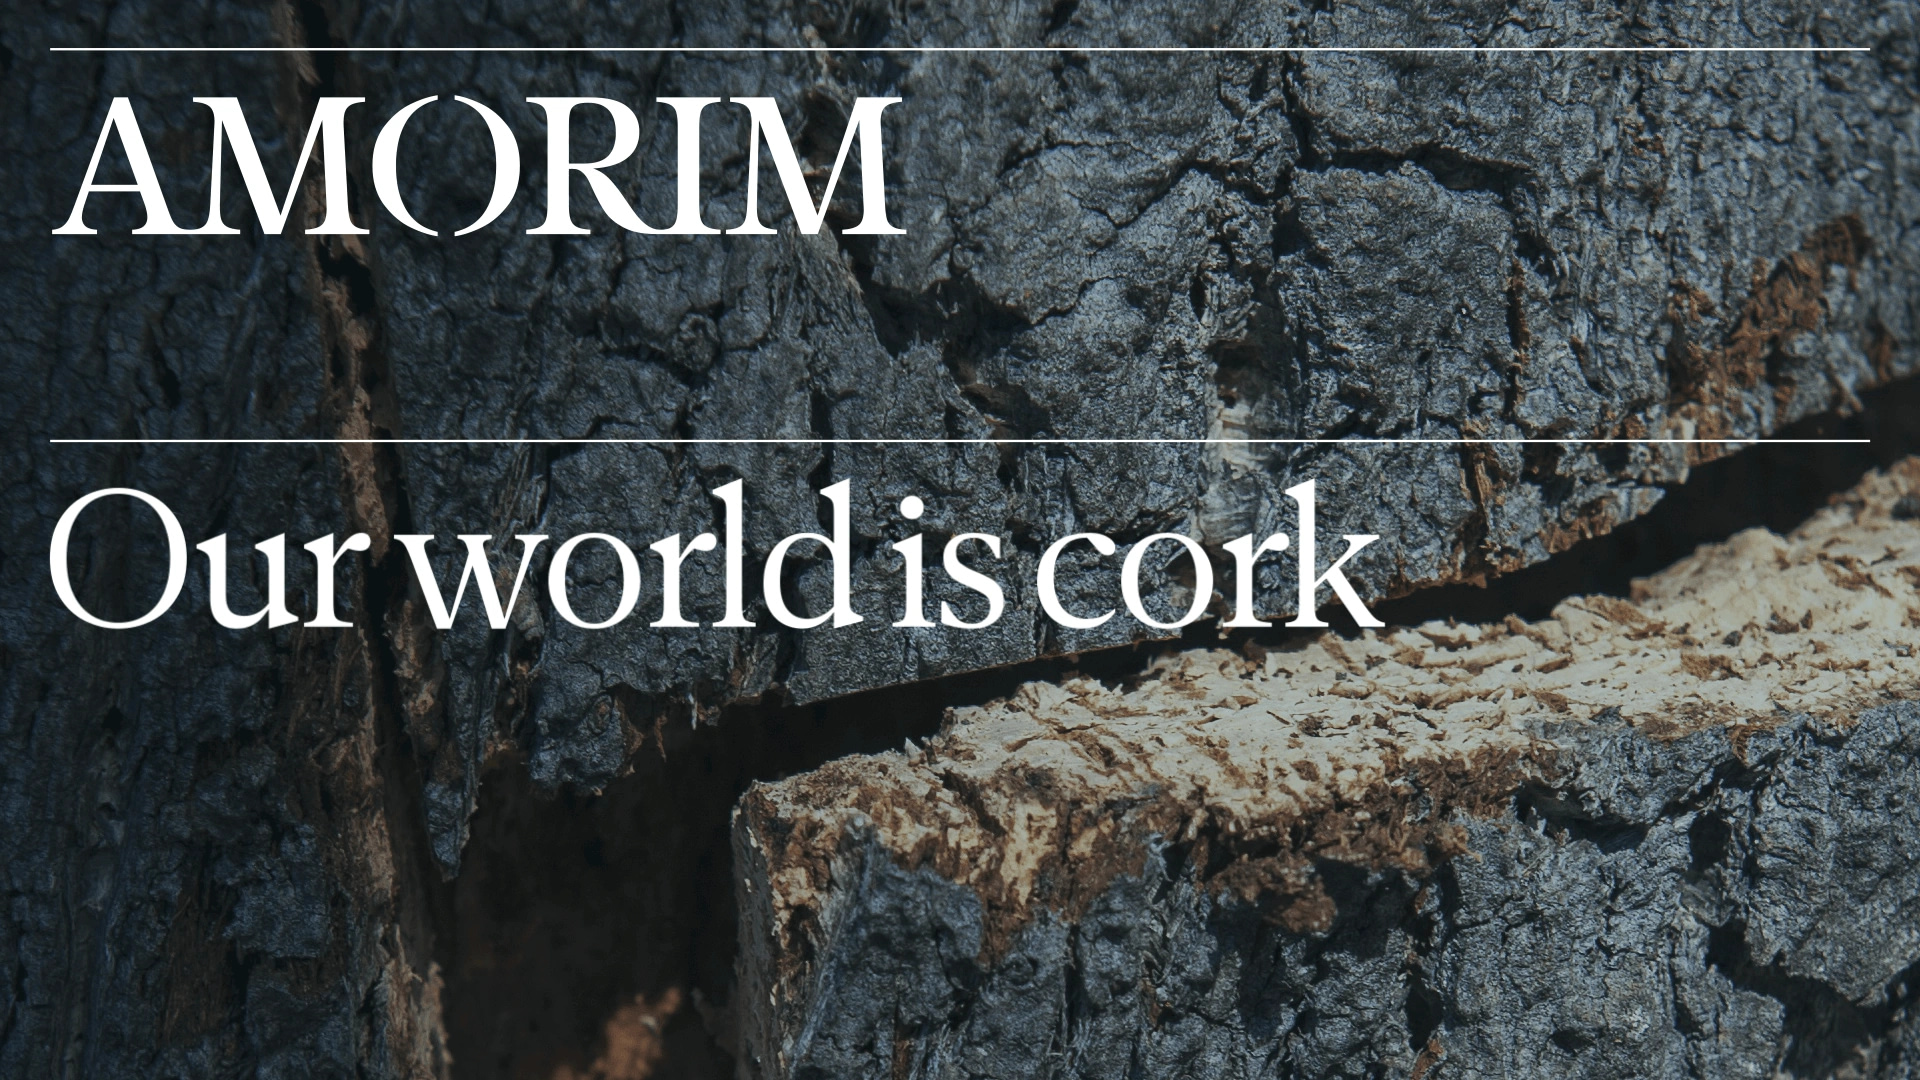 Image taken from the Amorim motion film, a photography of a tree's texture with the Amorim logo and the signature "Our world is cork".